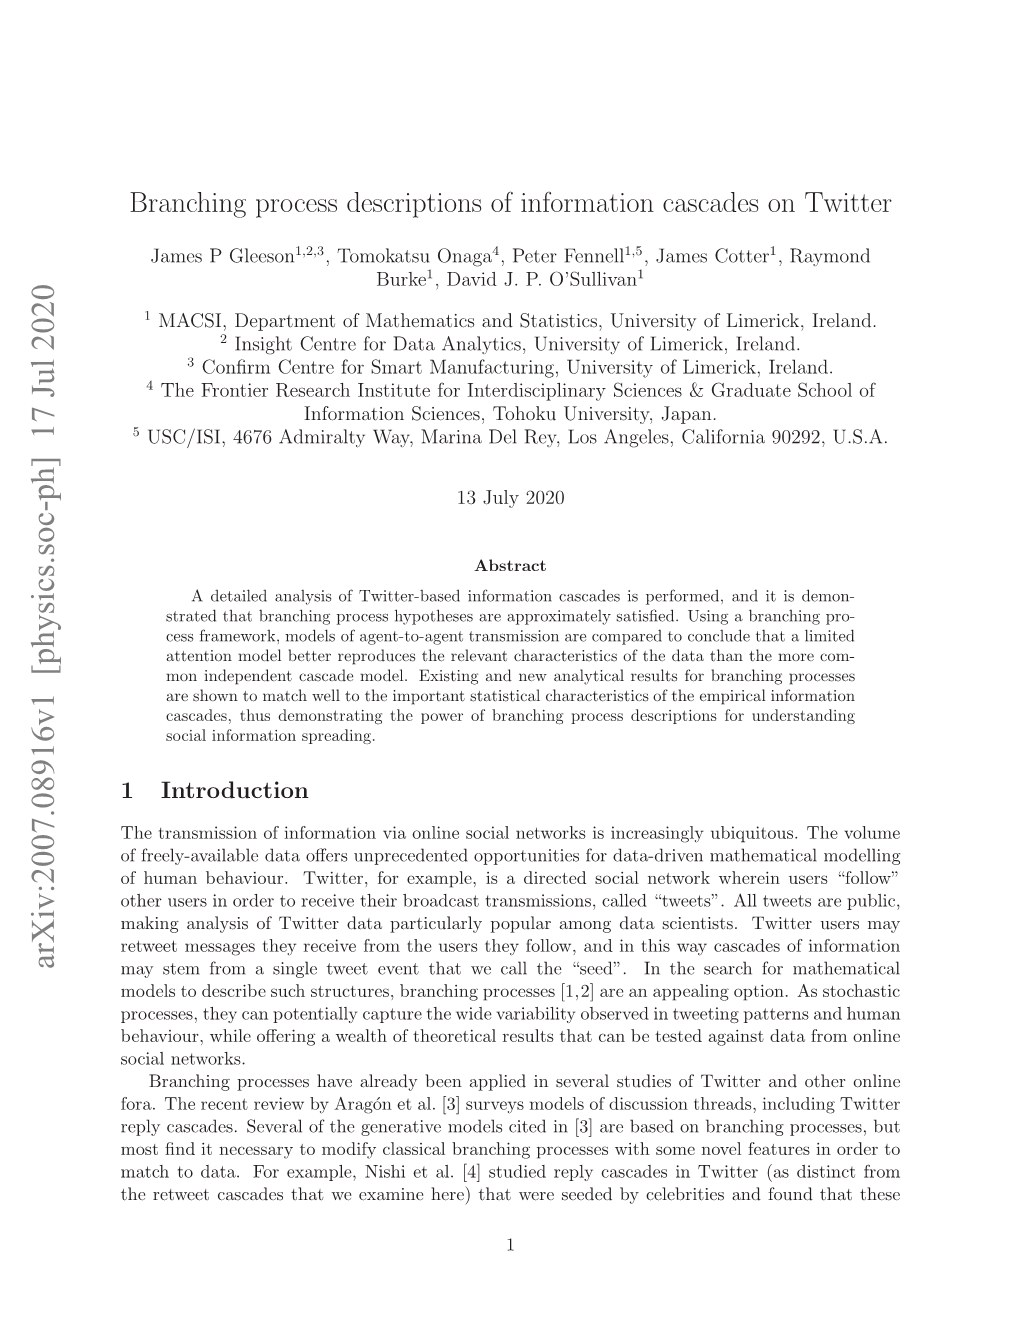 Branching Process Descriptions of Information Cascades on Twitter